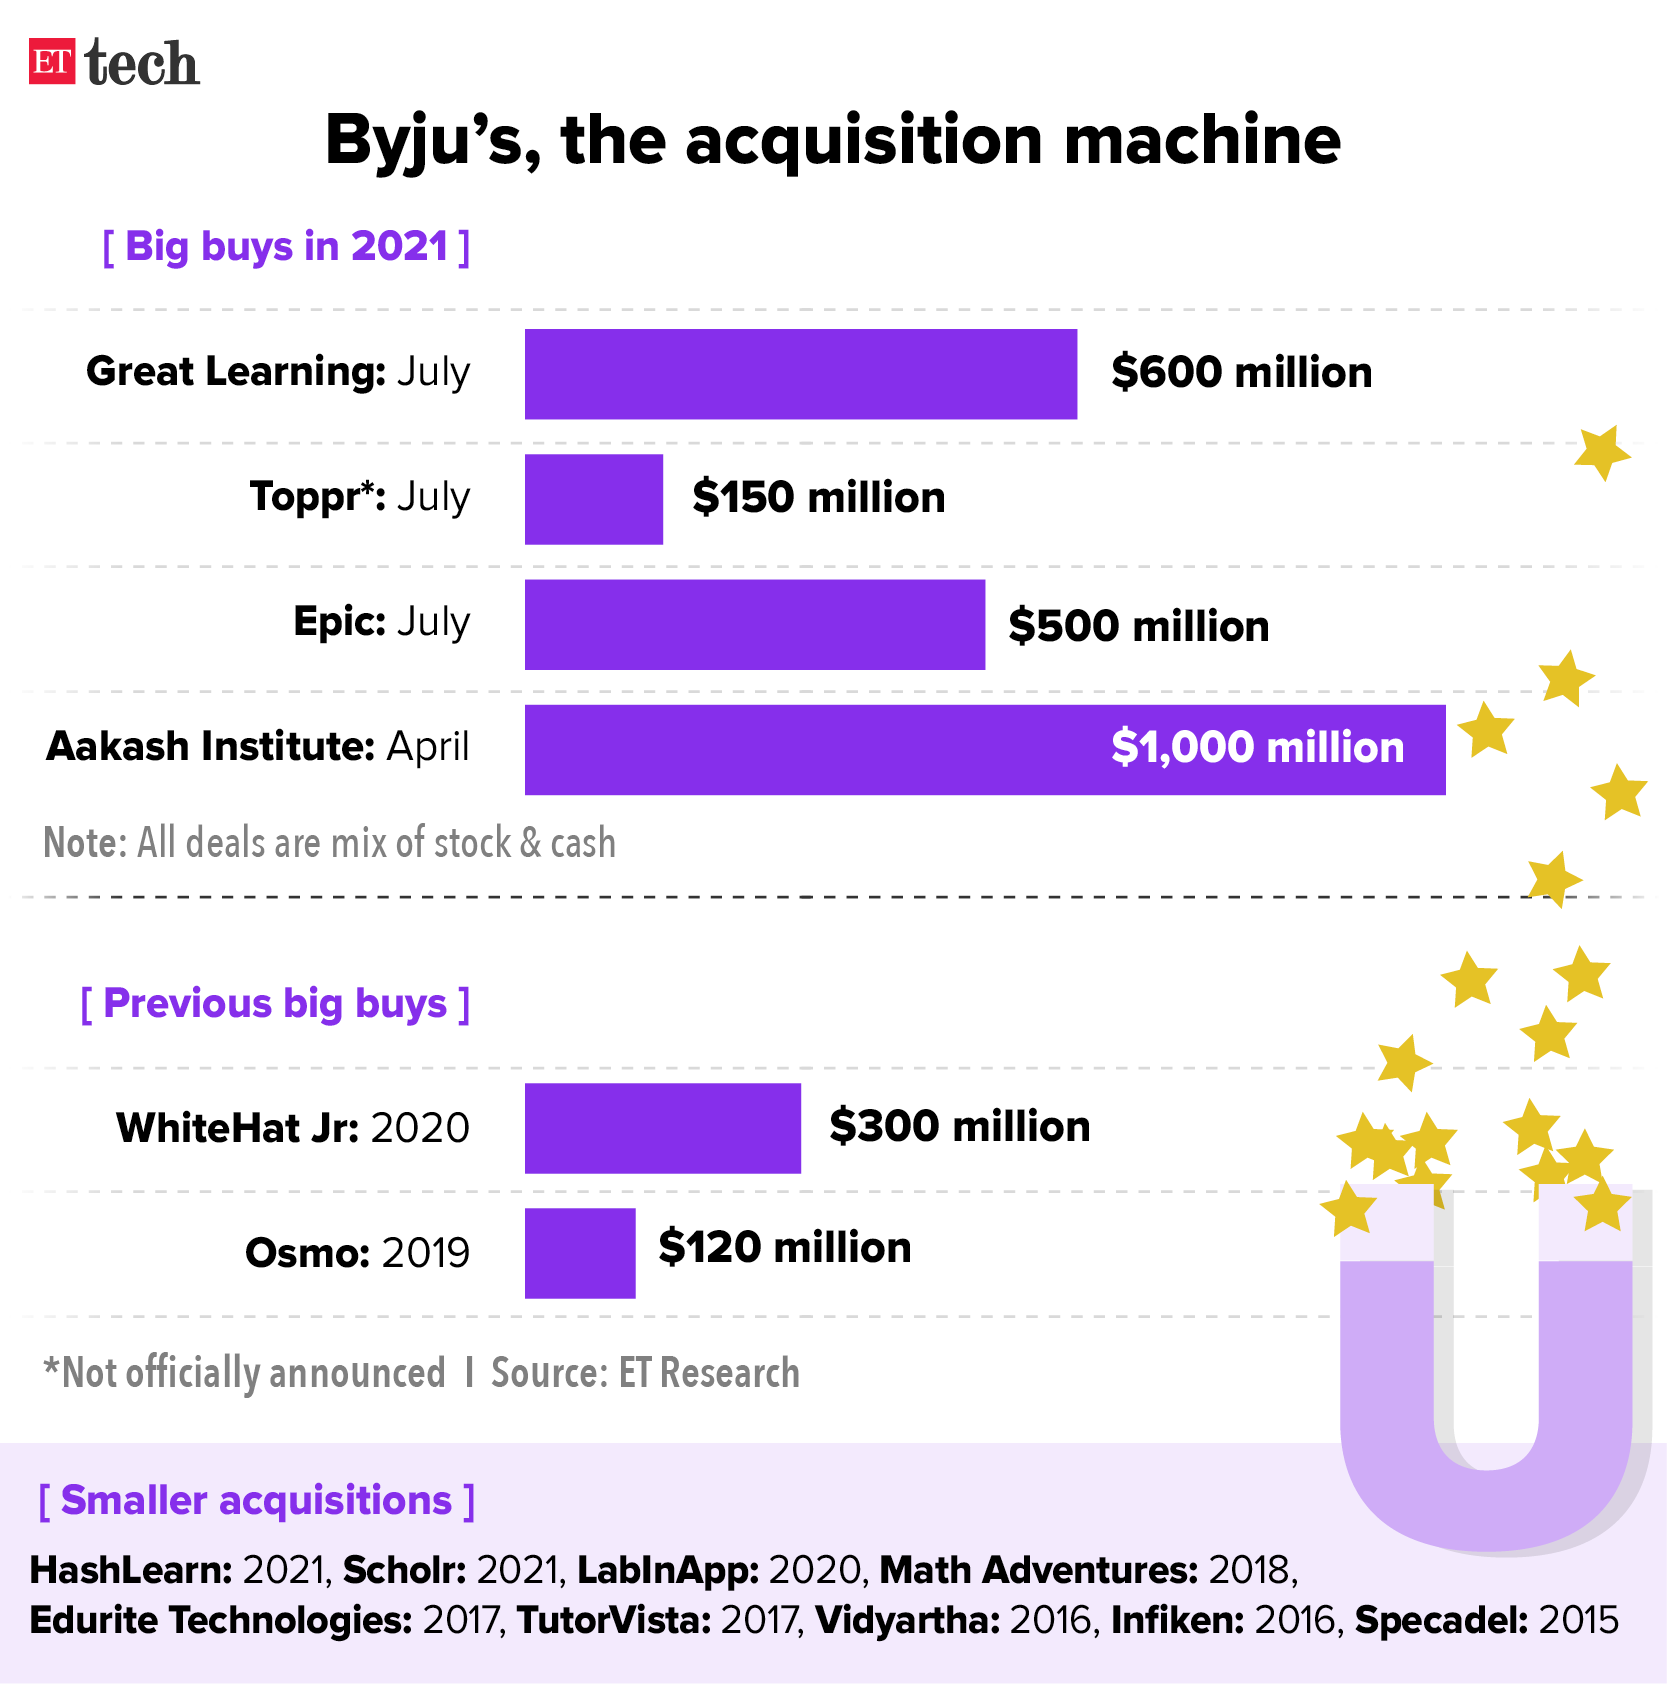 Byjus acquisitions